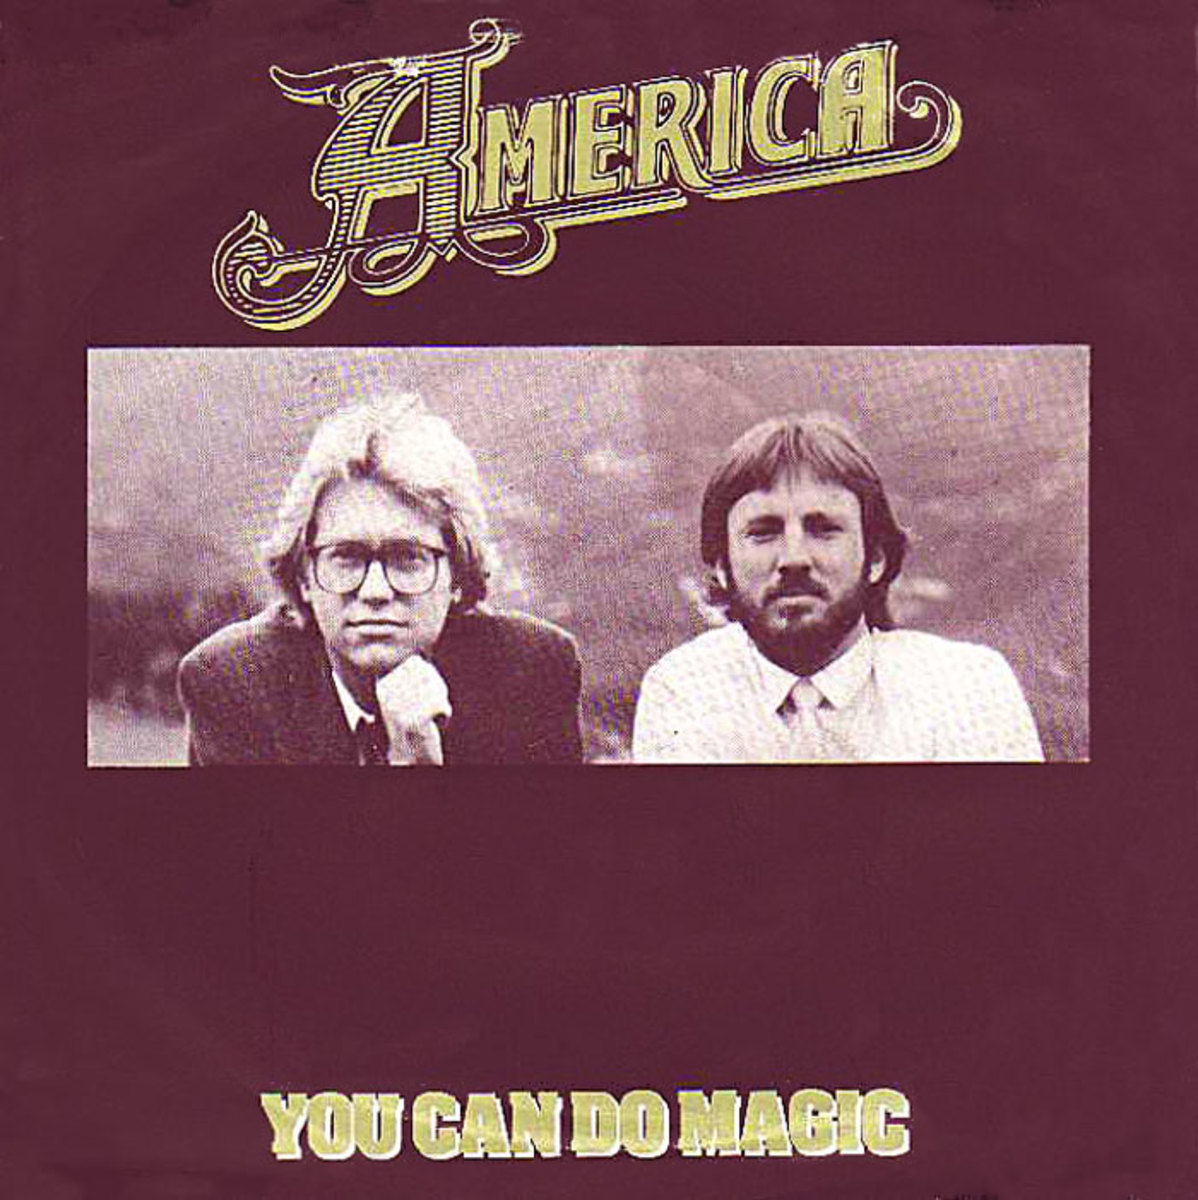 The U.K. 45 picture sleeve for "You Can Do Magic."